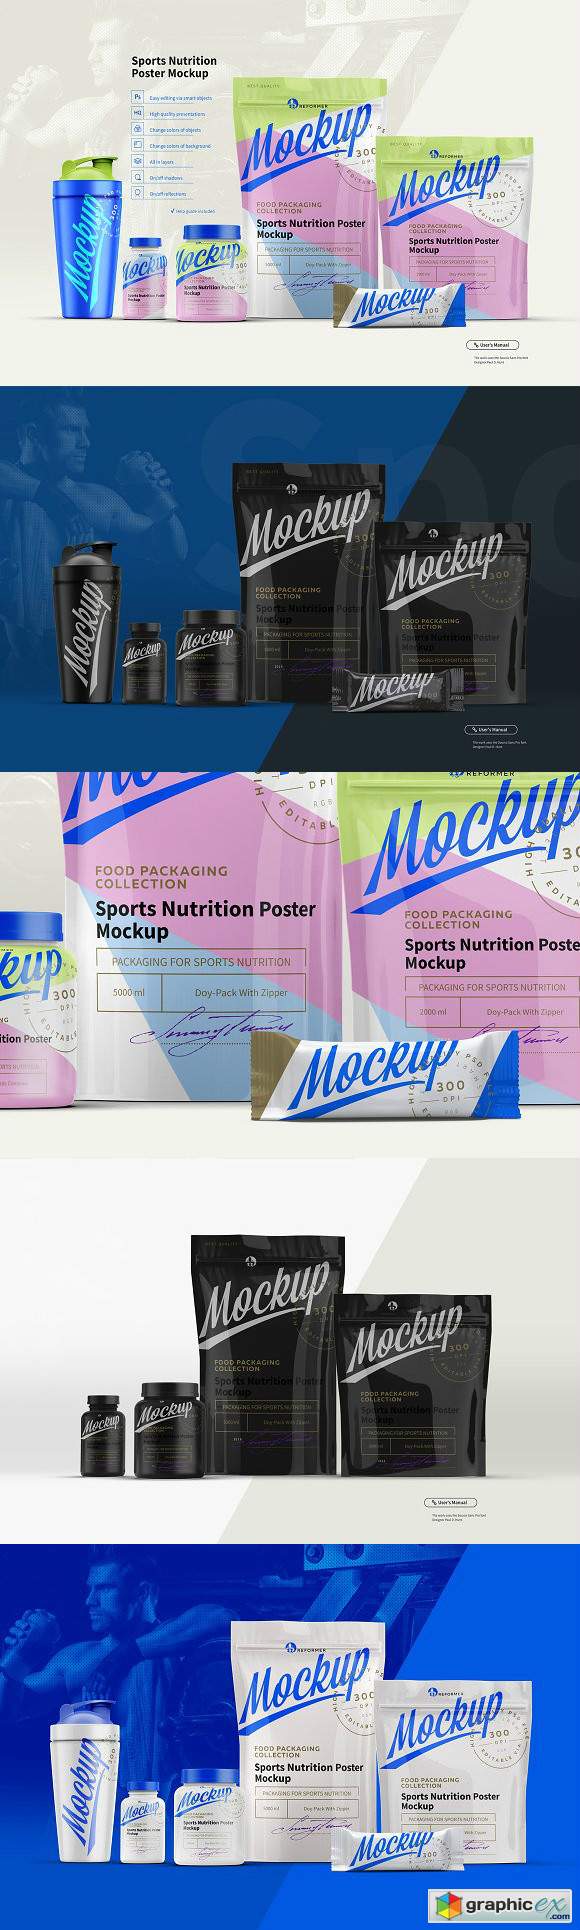 Sports Nutrition Poster Mock-Up